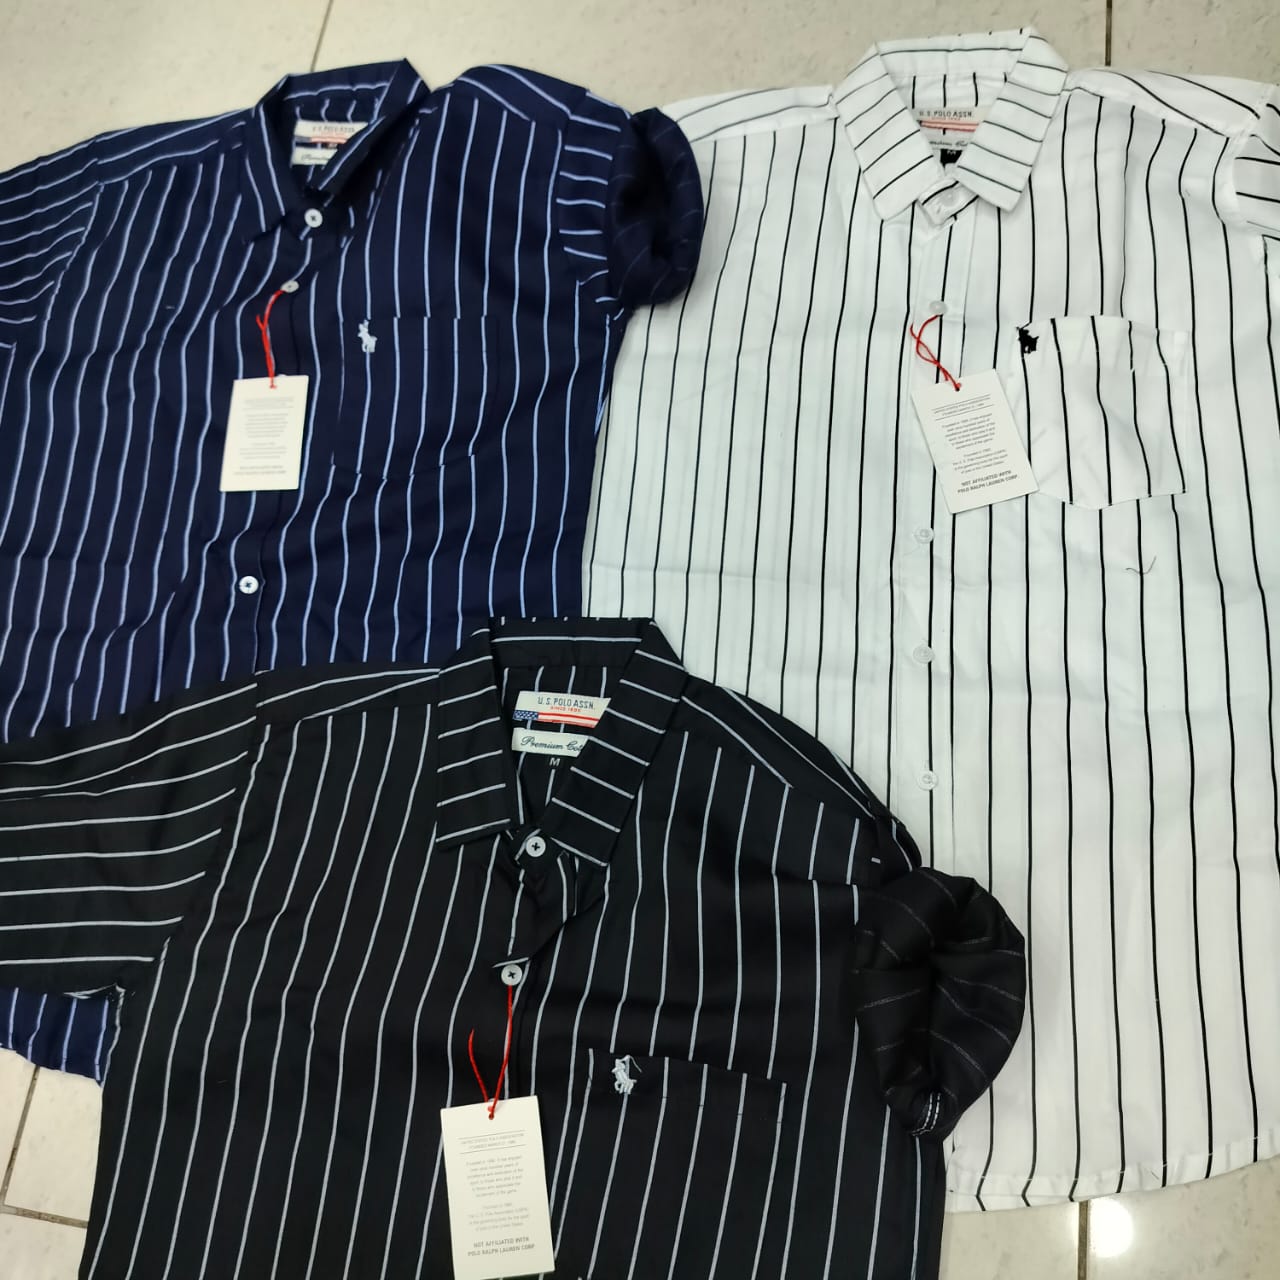 Details View - US POLO Shirt photos - reseller,reseller marketplace,advetising your products,reseller bazzar,resellerbazzar.in,india's classified site,US POLO Shirt | US POLO Shirt in surat | US POLO Shirt in vadodara | US POLO Shirt in Gujarat 